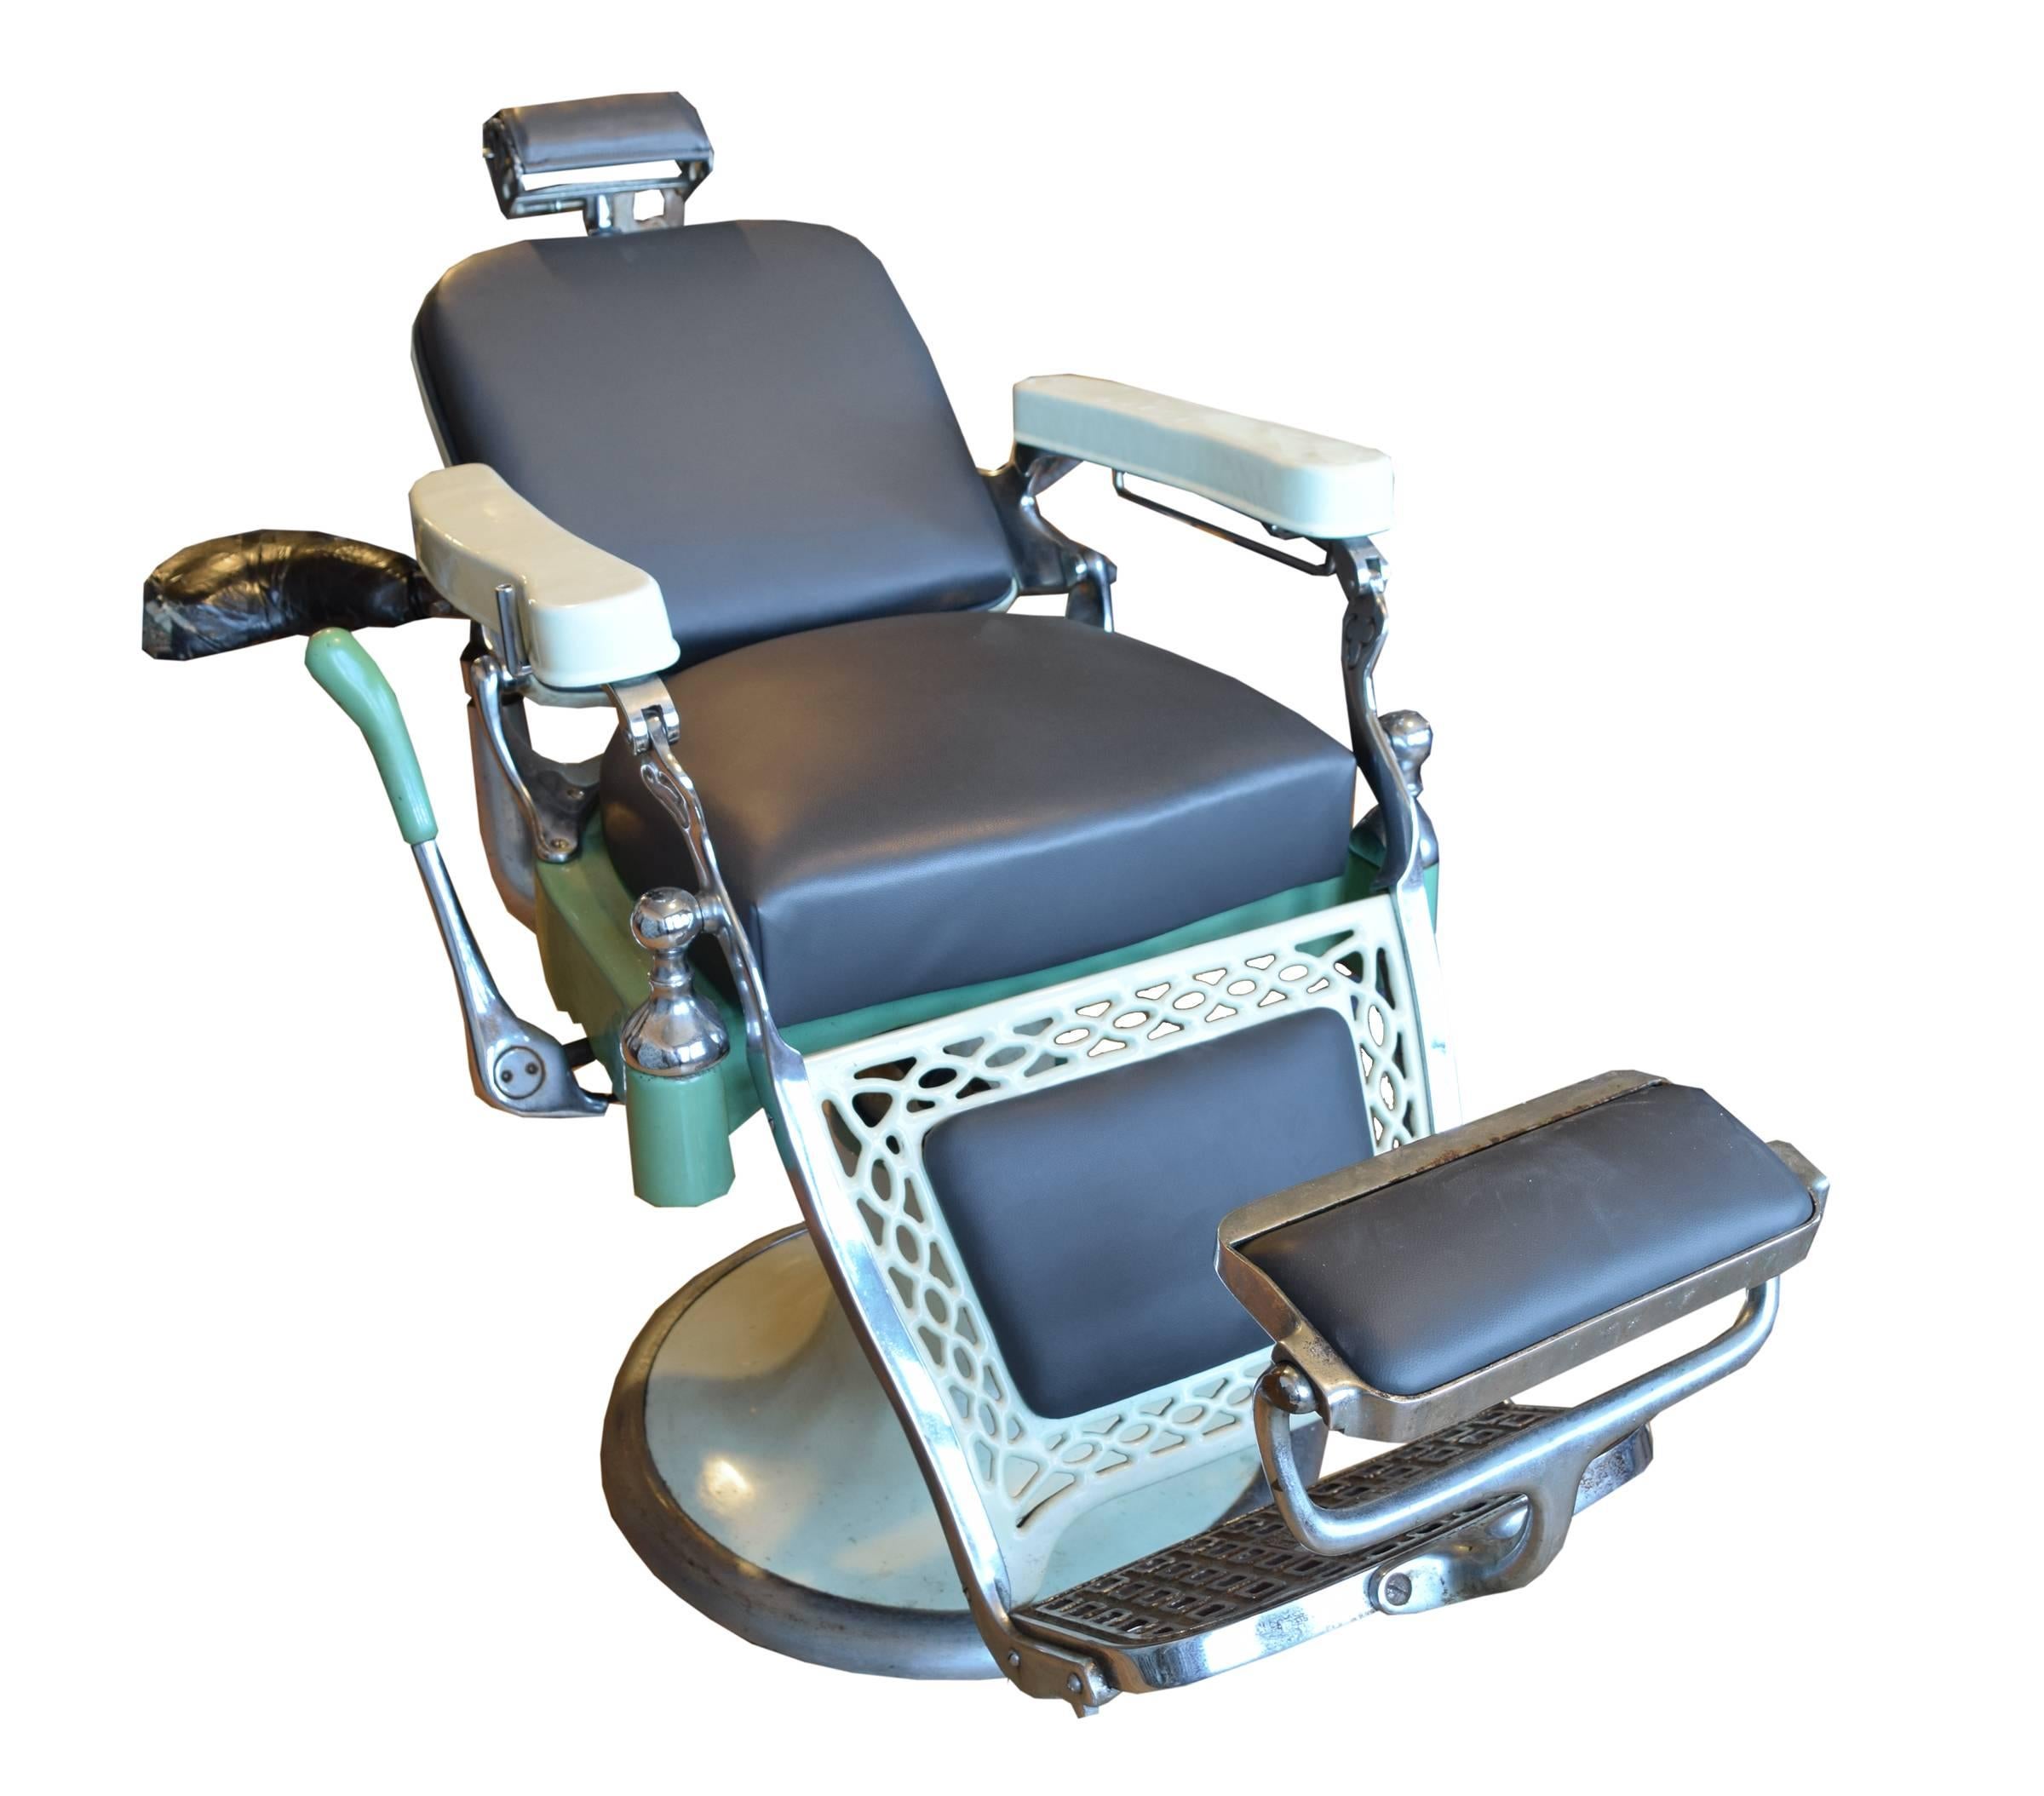 An Emil J Paidar Company, Chicago, Illinois, duo-hydraulic barber shop chair with upholstered seat, headrest, and footrest, and porcelain enameled armrests and leg rest, with rare attached barber's seat, circa 1920.